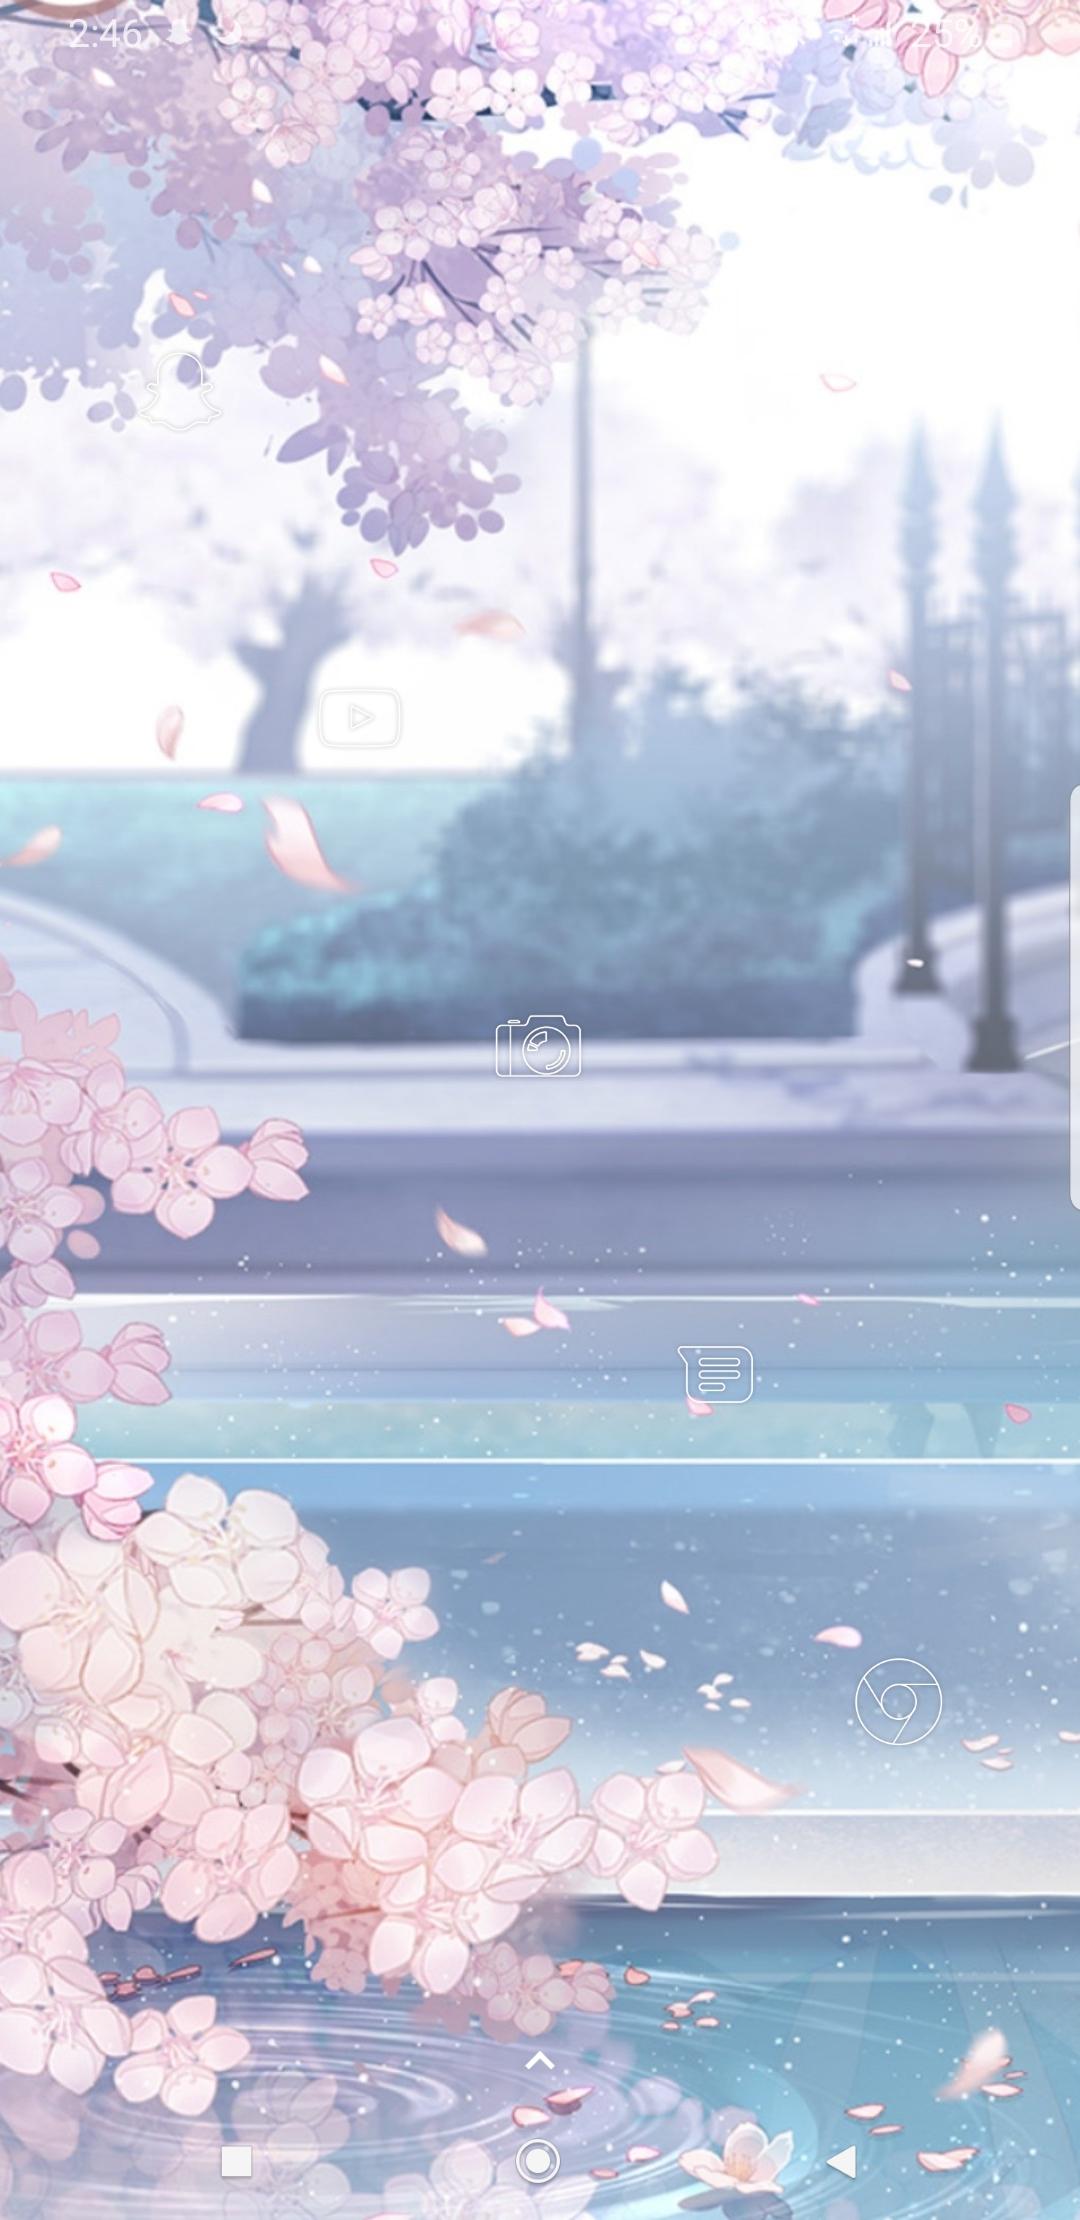 The hell event background make beautiful phone wallpaper